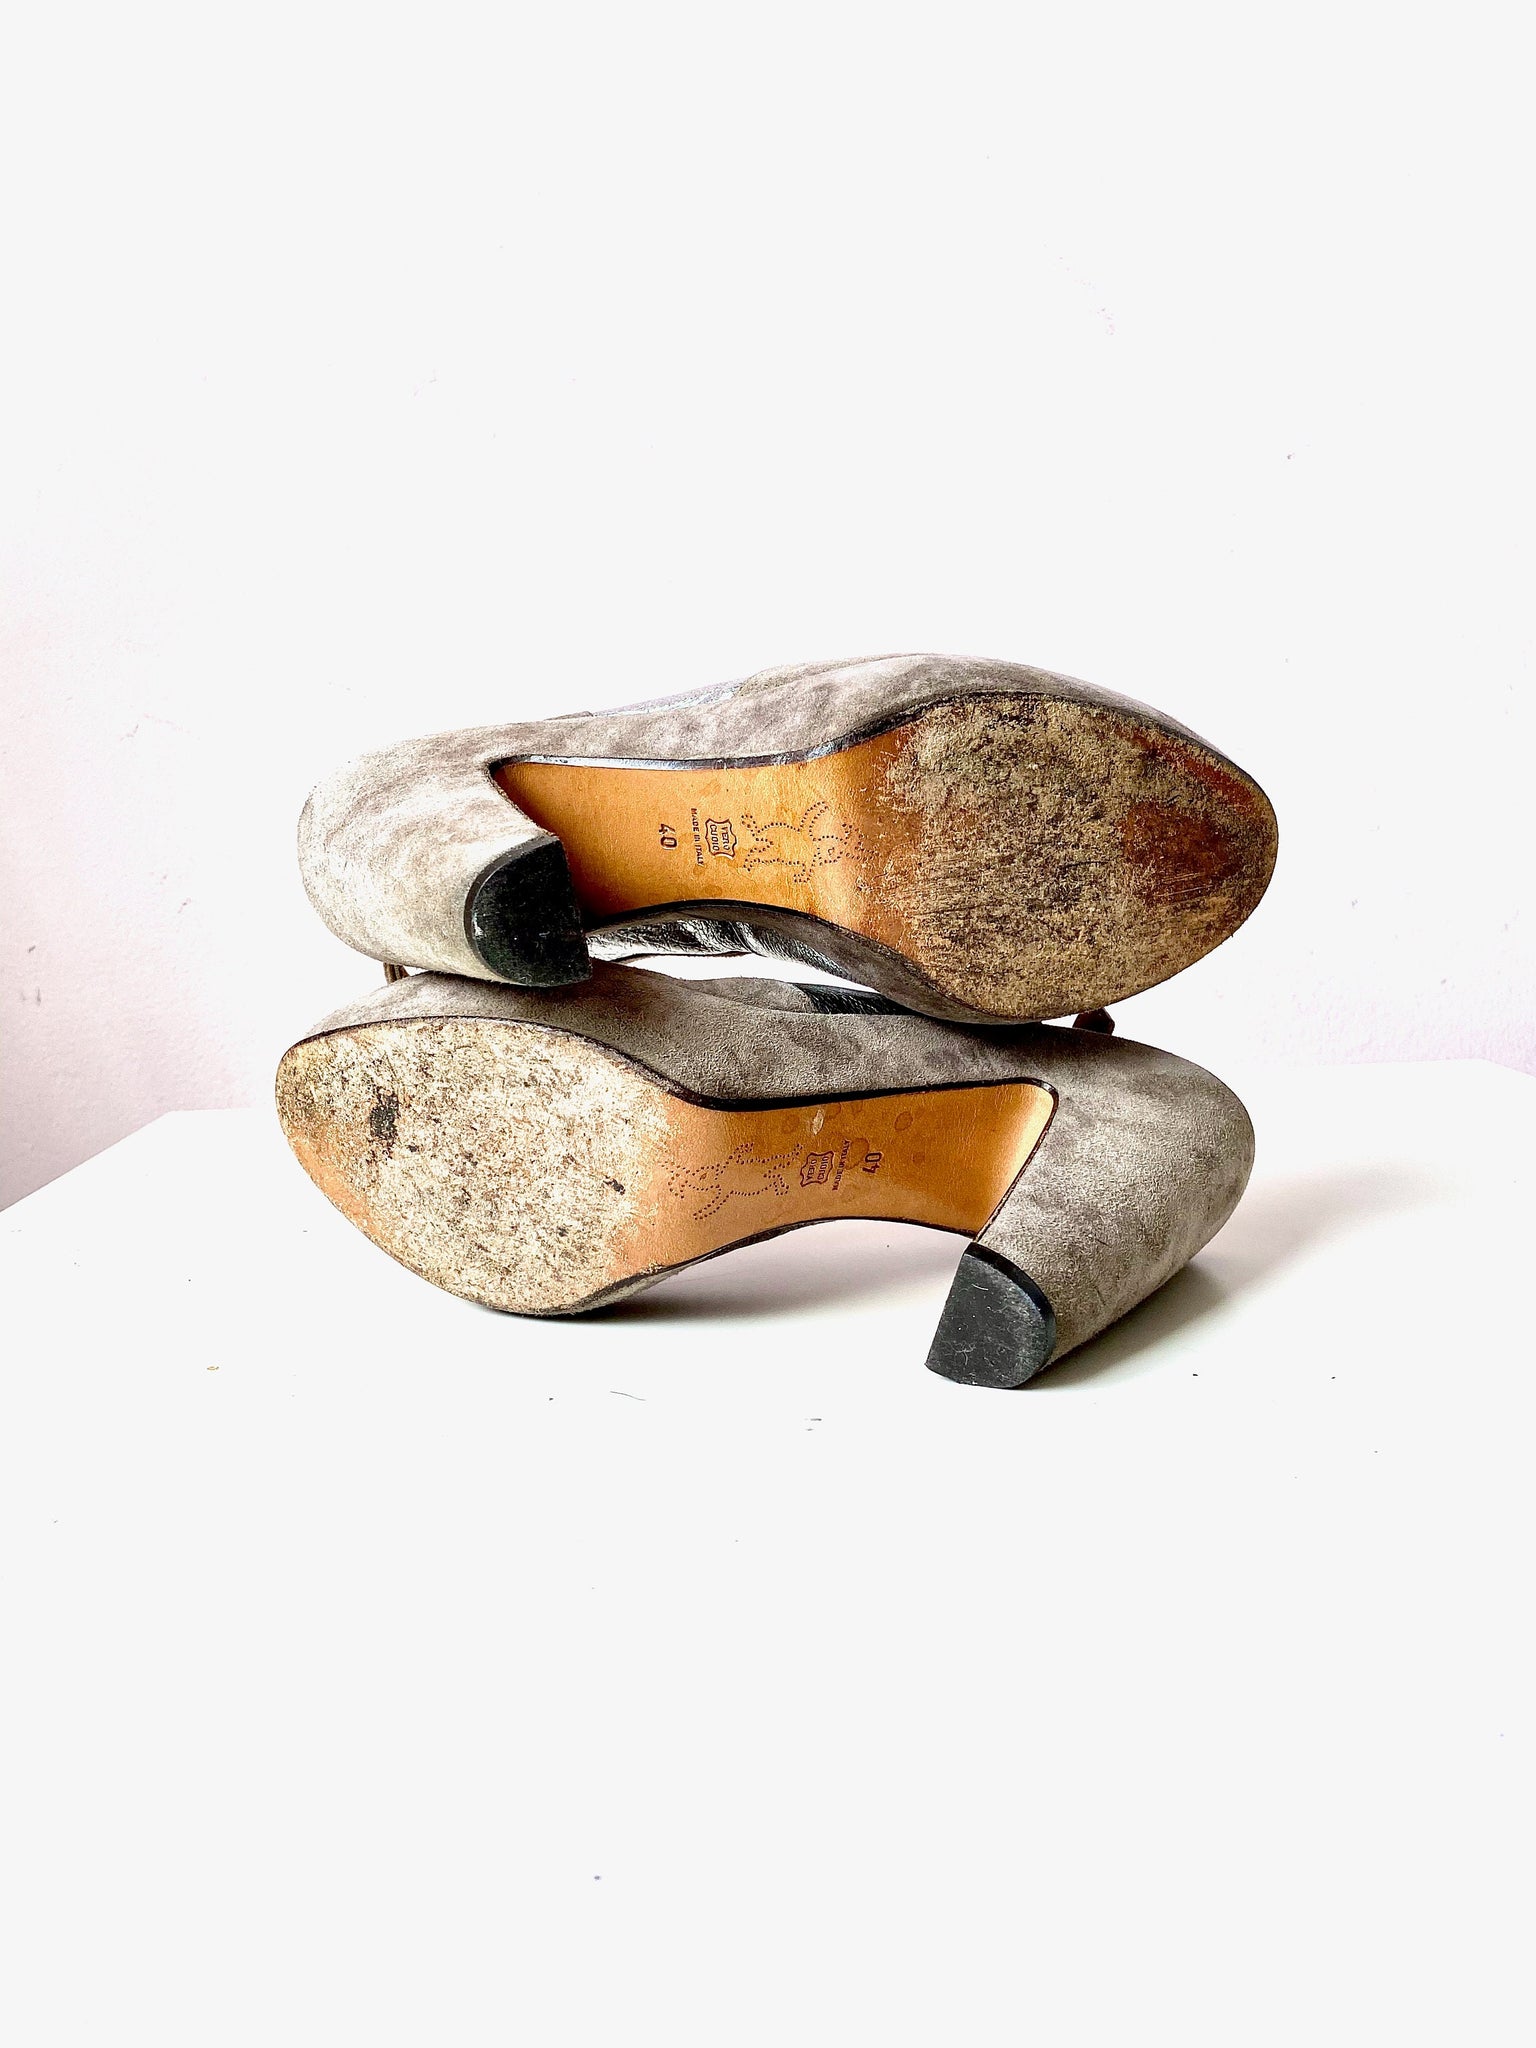 Vintage Marni chunky heel platform silver and taupe glam suede slingback